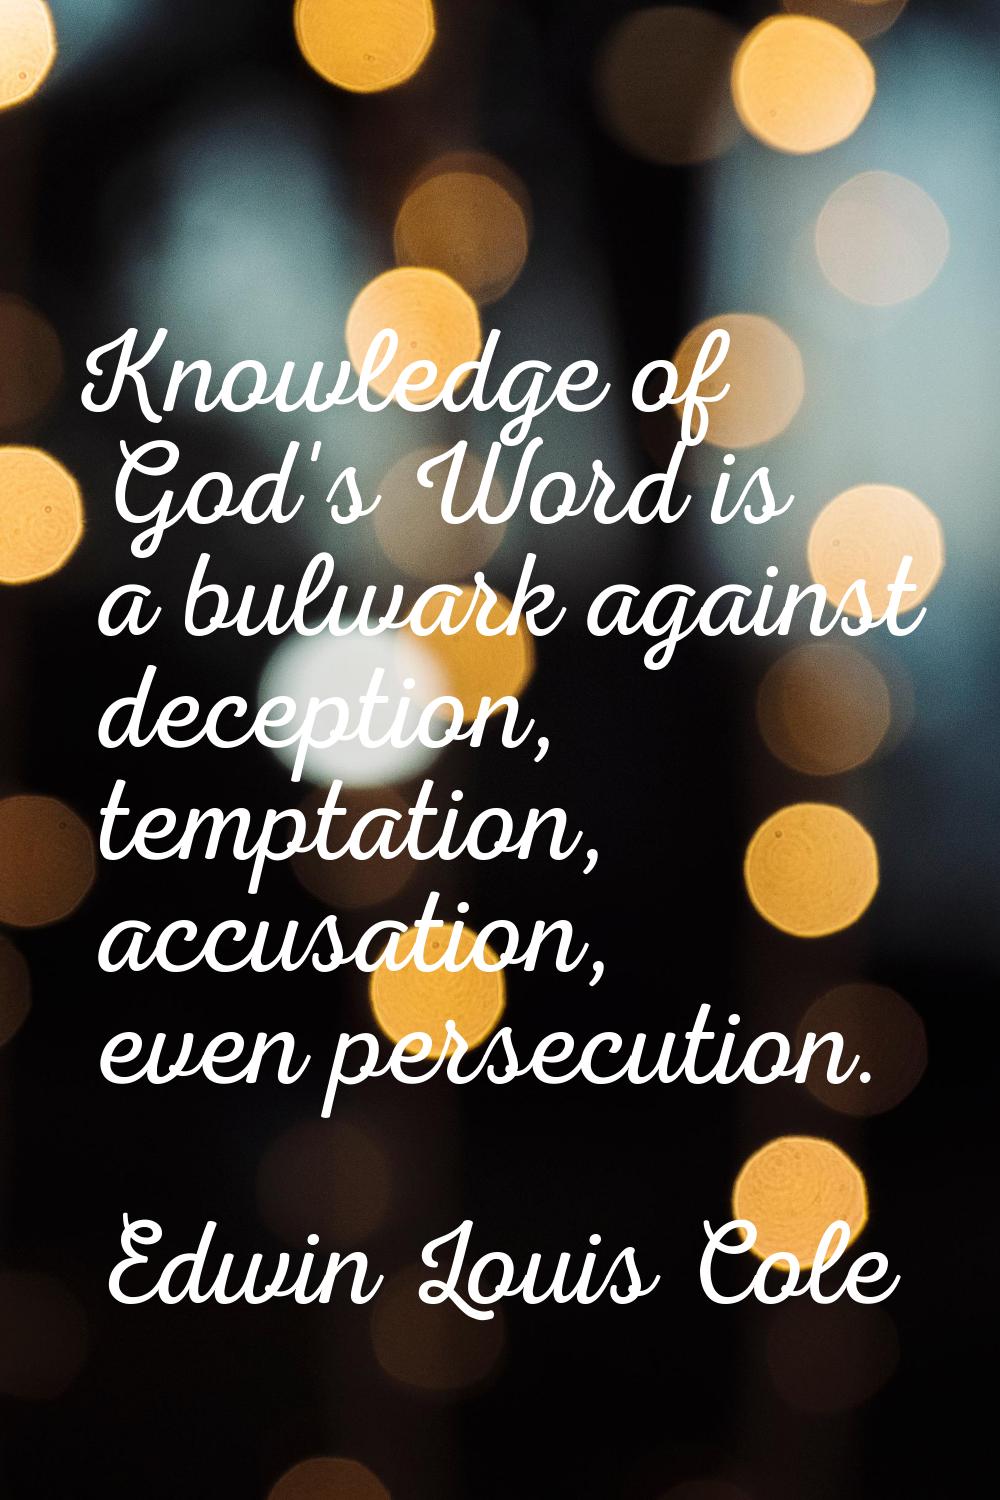 Knowledge of God's Word is a bulwark against deception, temptation, accusation, even persecution.